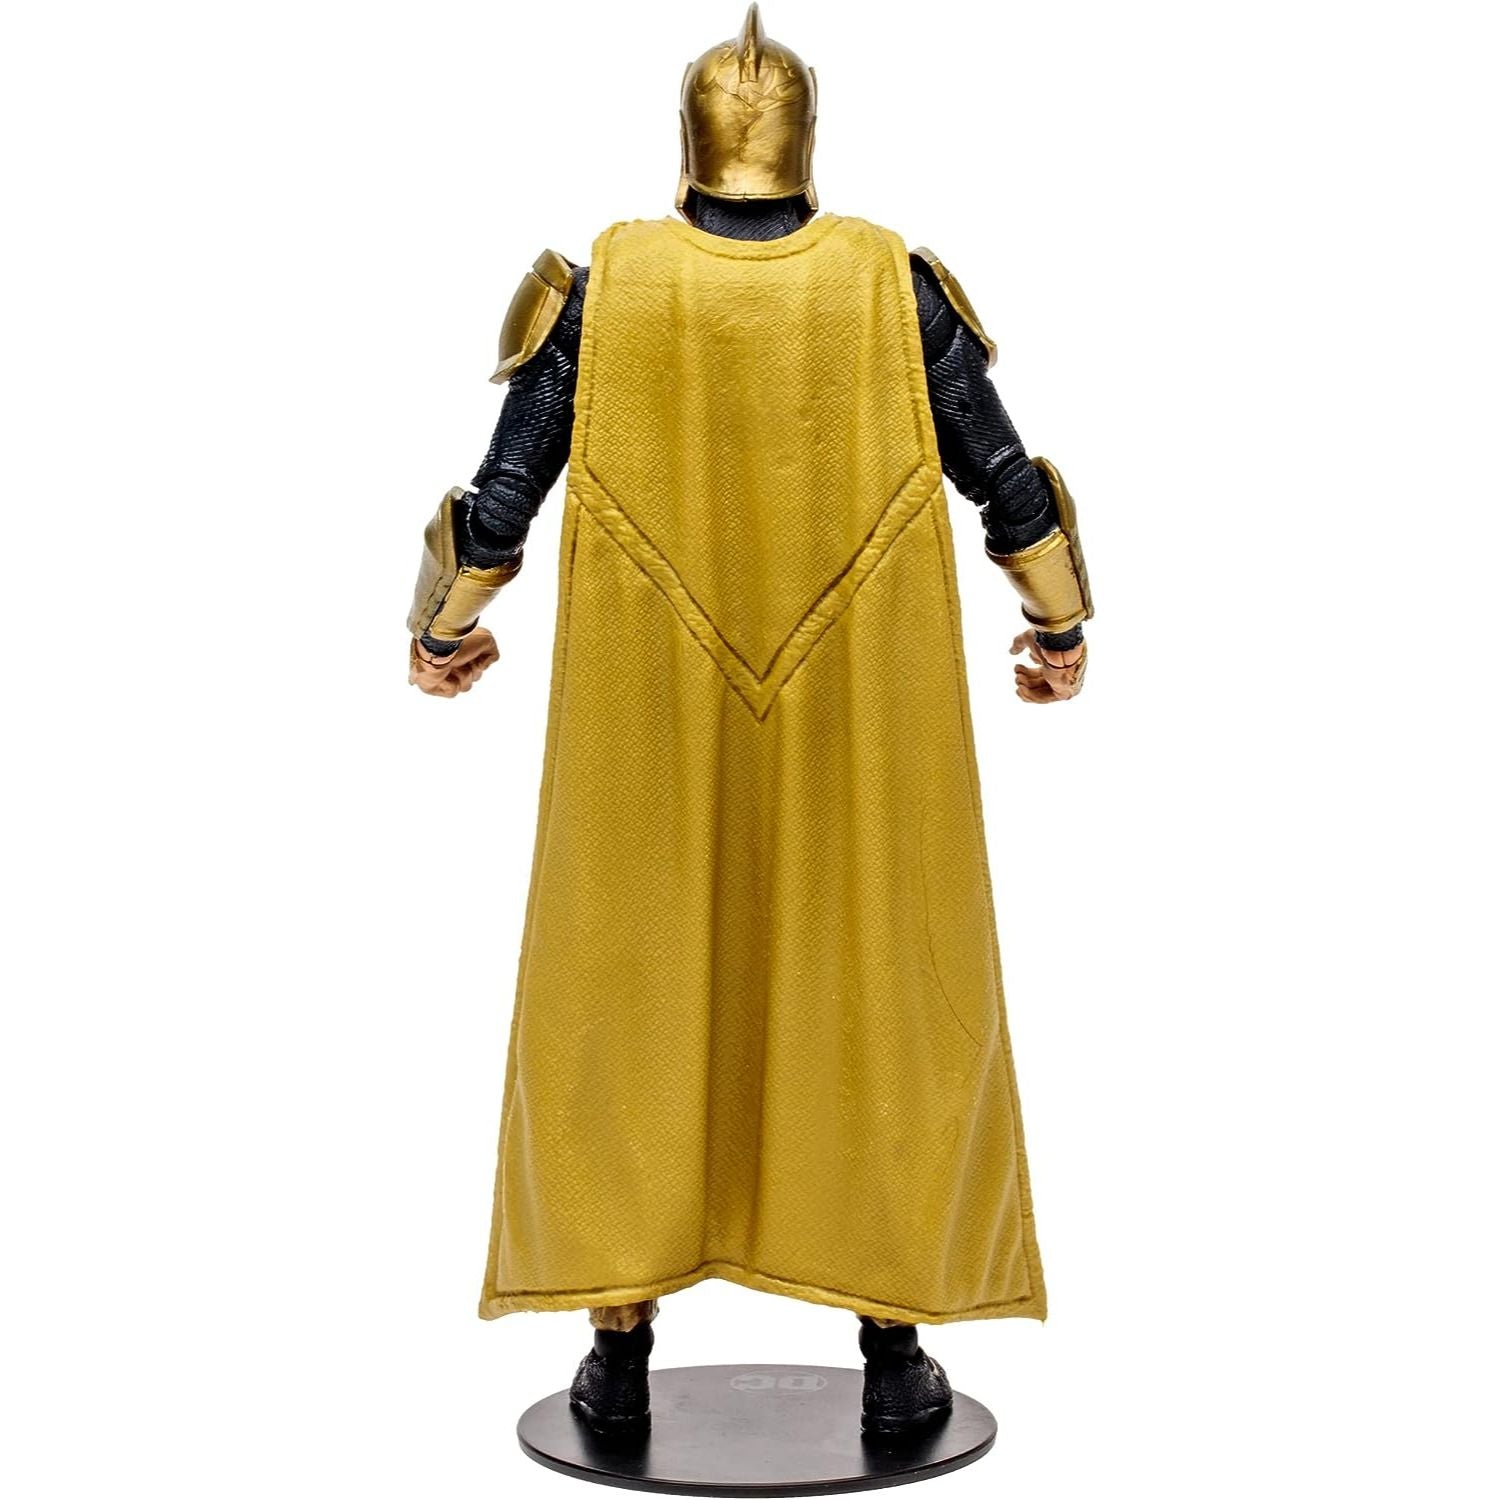 Injustice 2 - DR. Fate Action Figure Toy back view - Heretoserveyou